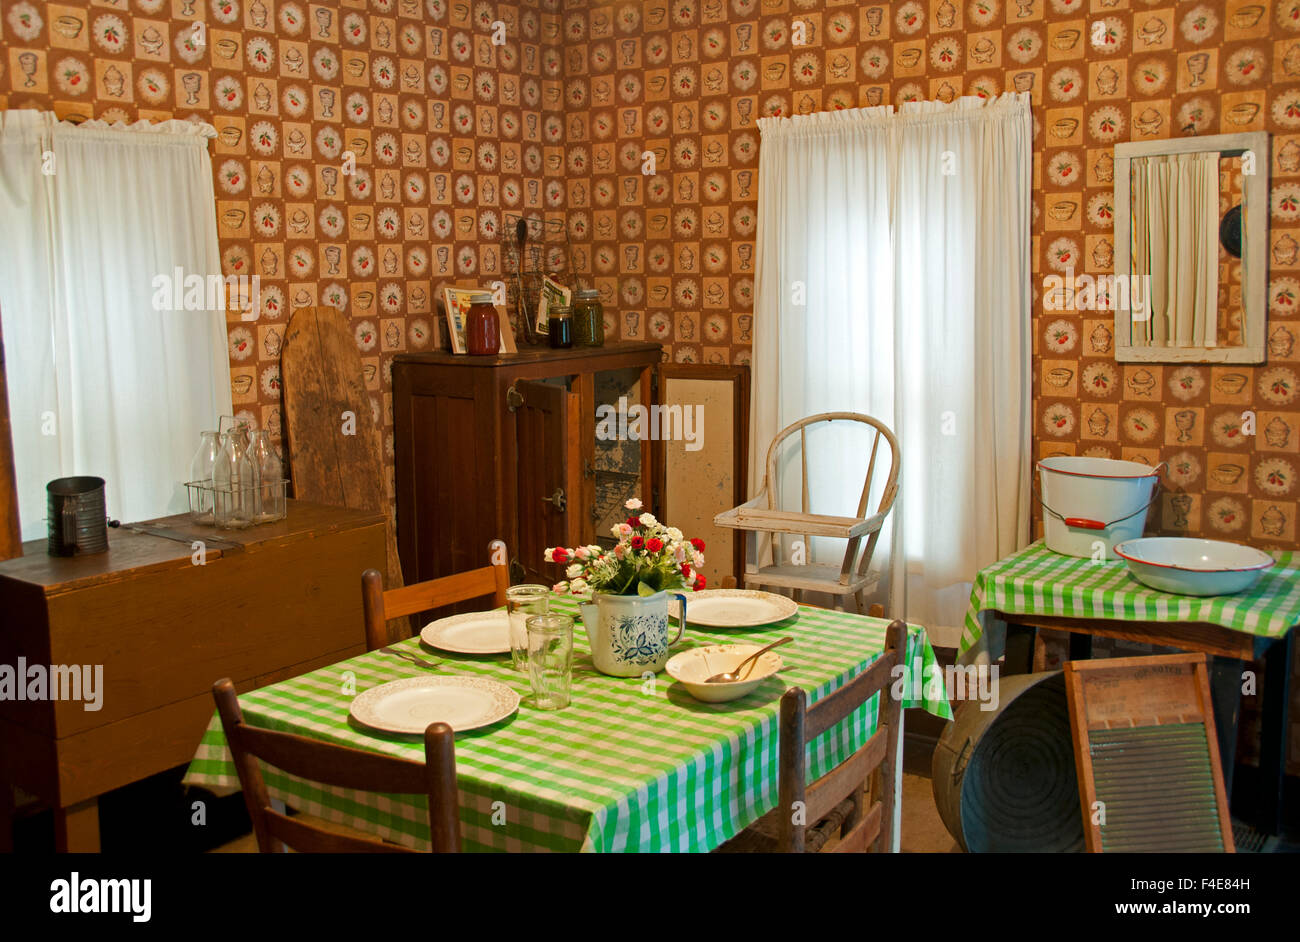 The kitchen at the birthplace house of Elvis Presley, Tupelo, Mississippi, USA Stock Photo